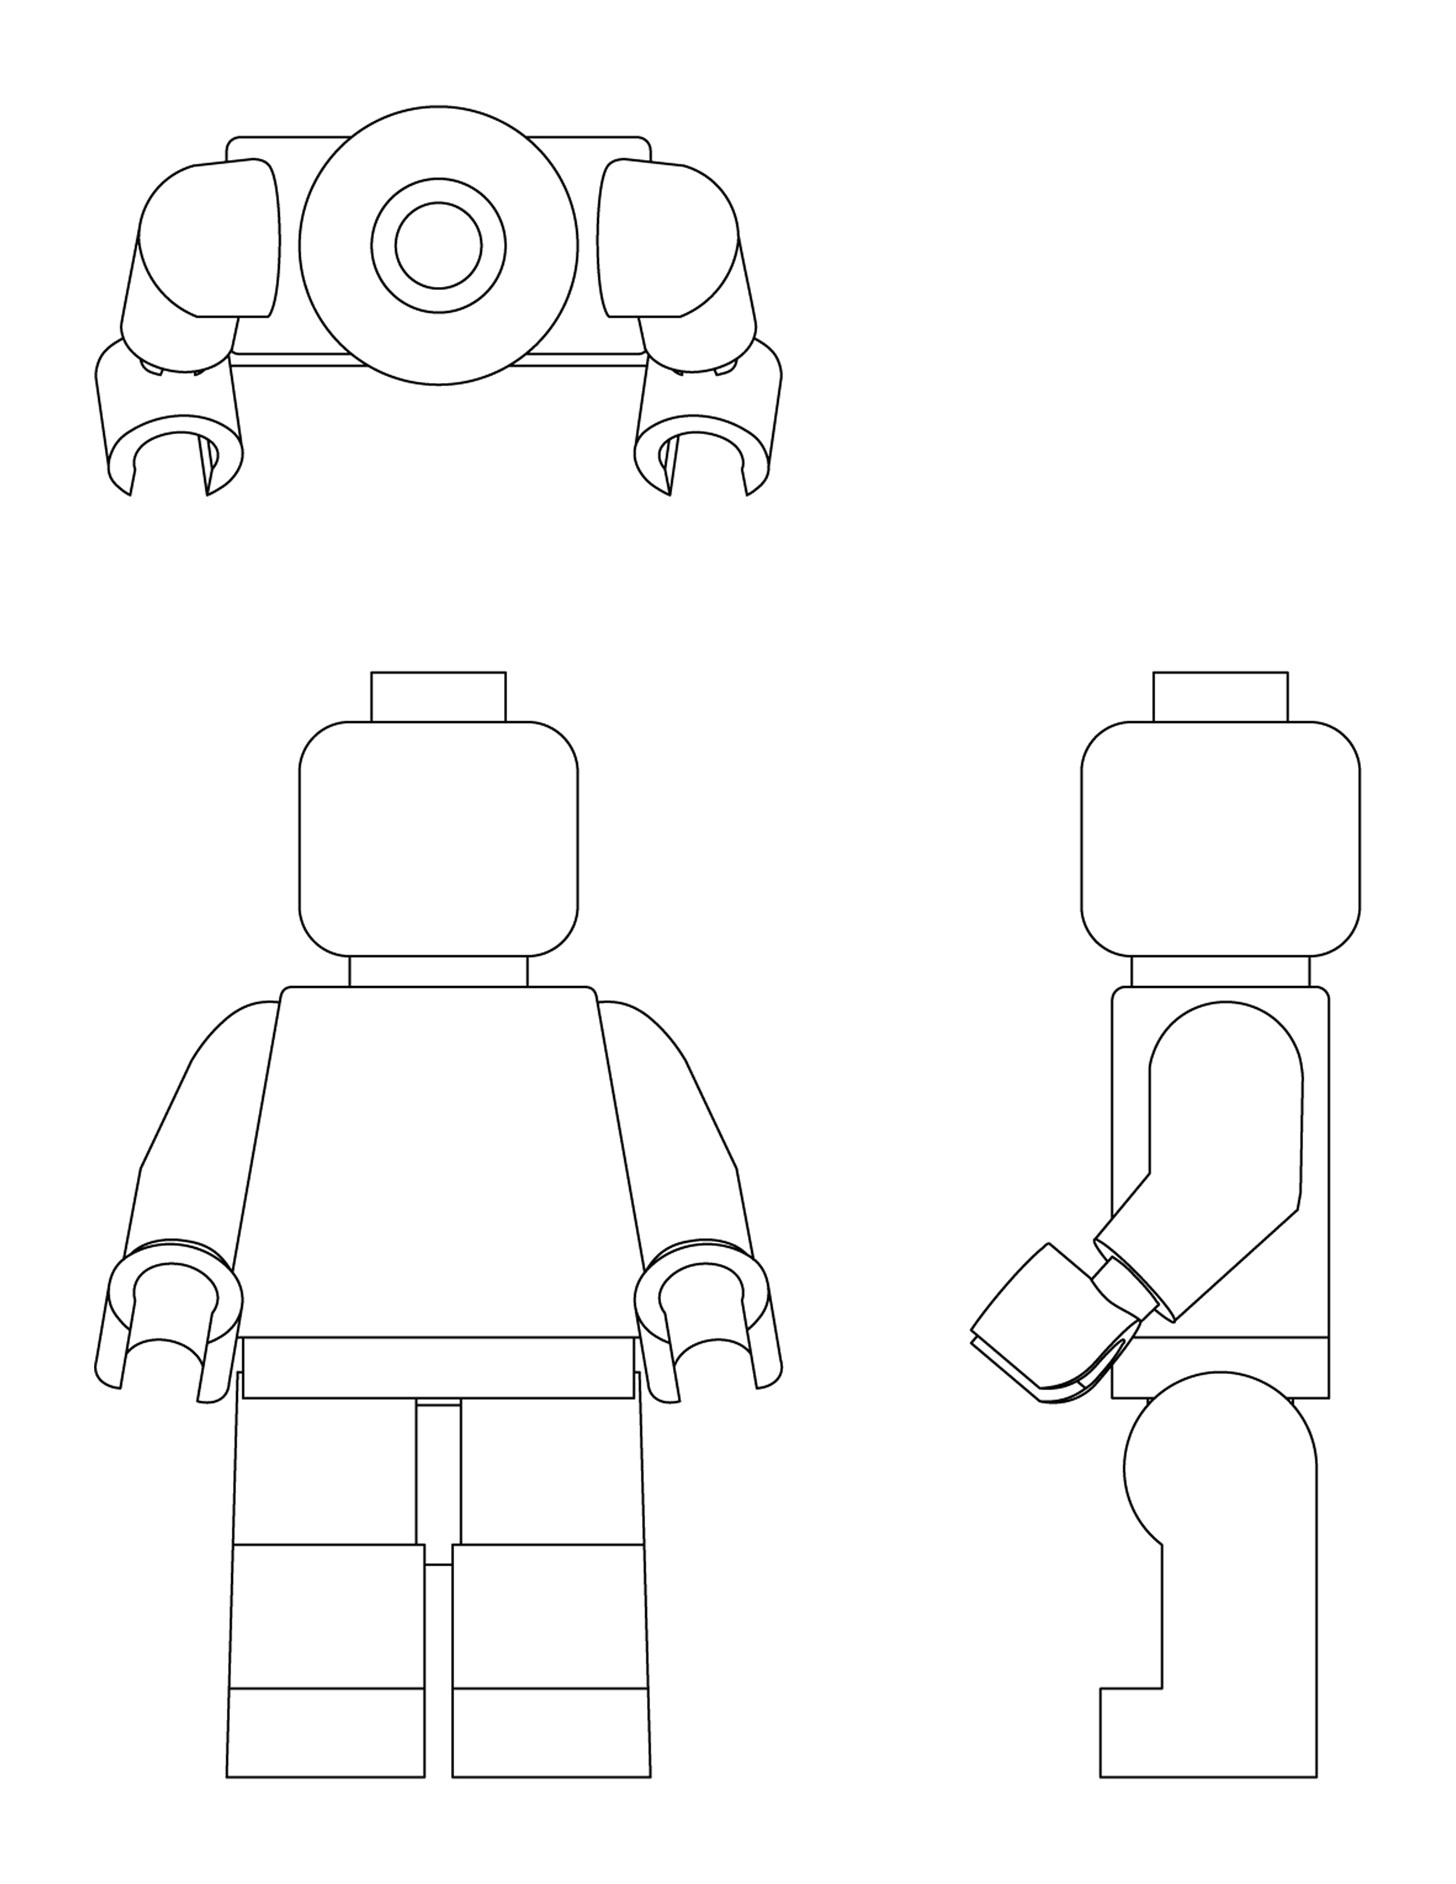 Lego Figure Template Excellent Warhammer 40k Templates Pictures Inspiration...